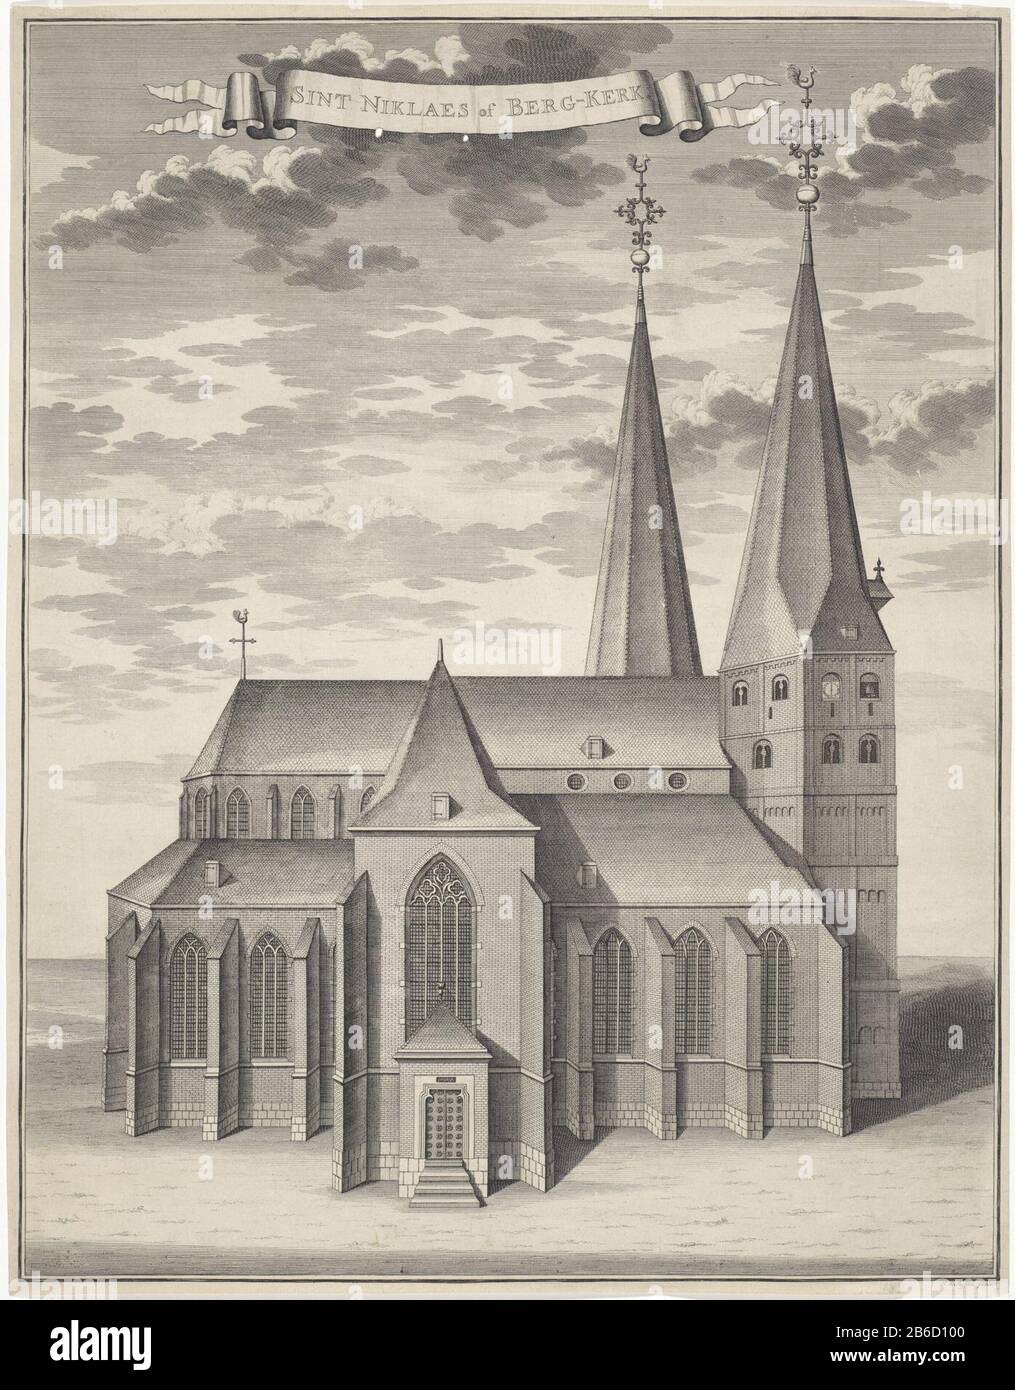 Bergkerk Deventer St. Niklaes or Mountain Church (title object) Side view of Bergkerk Deventer. Above the church a spell bond with the names of the kerk. Manufacturer : printmaker: Joost van Sassen (listed property) Place manufacture: Amsterdam Date: 1710 - 1736 Physical features: car material: paper Technique: engra (printing process) Dimensions: sheet: H 530 mm b × 410 mm Subject: church (exterior) Where: Bergkerk Stock Photo